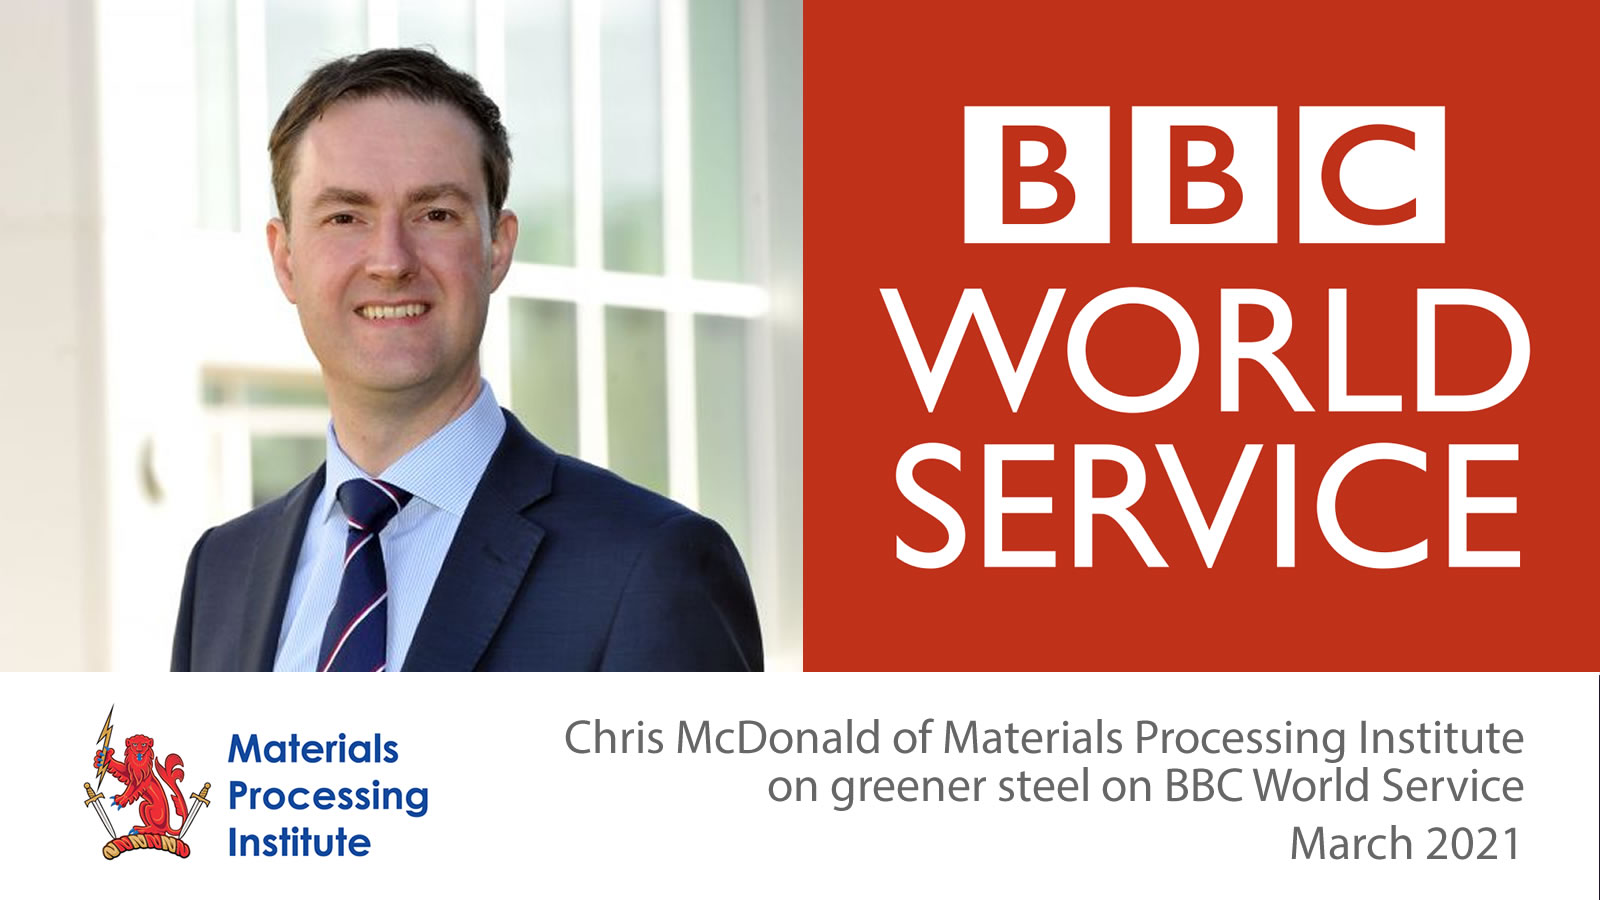 Chris McDonald discusses greener steel on BBC World Service - March 2021